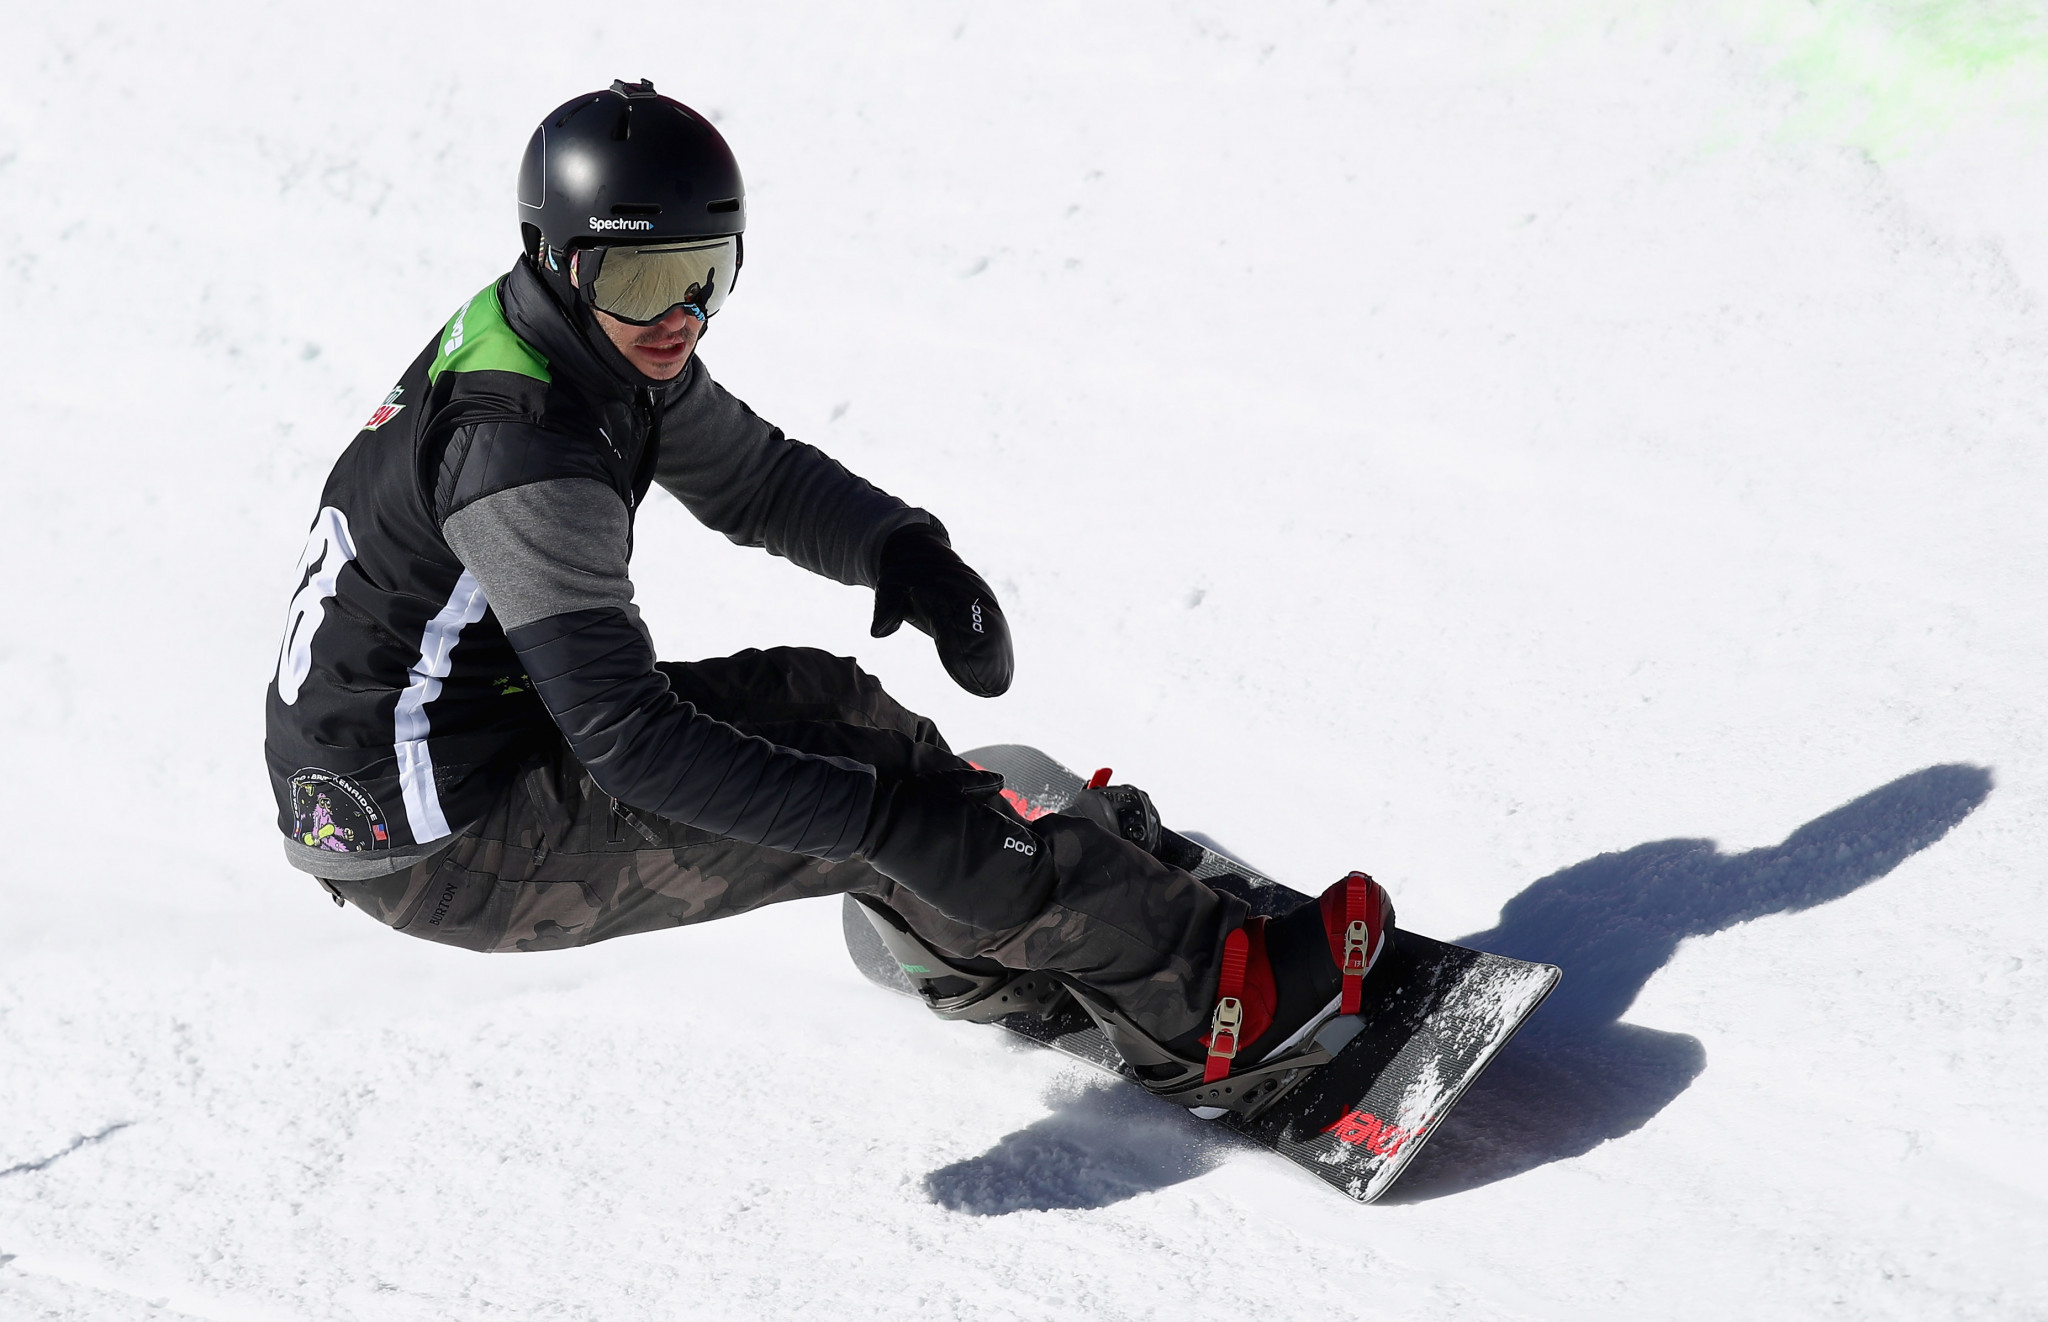 Americans eye overall World Para Snowboard World Cup titles in Big White